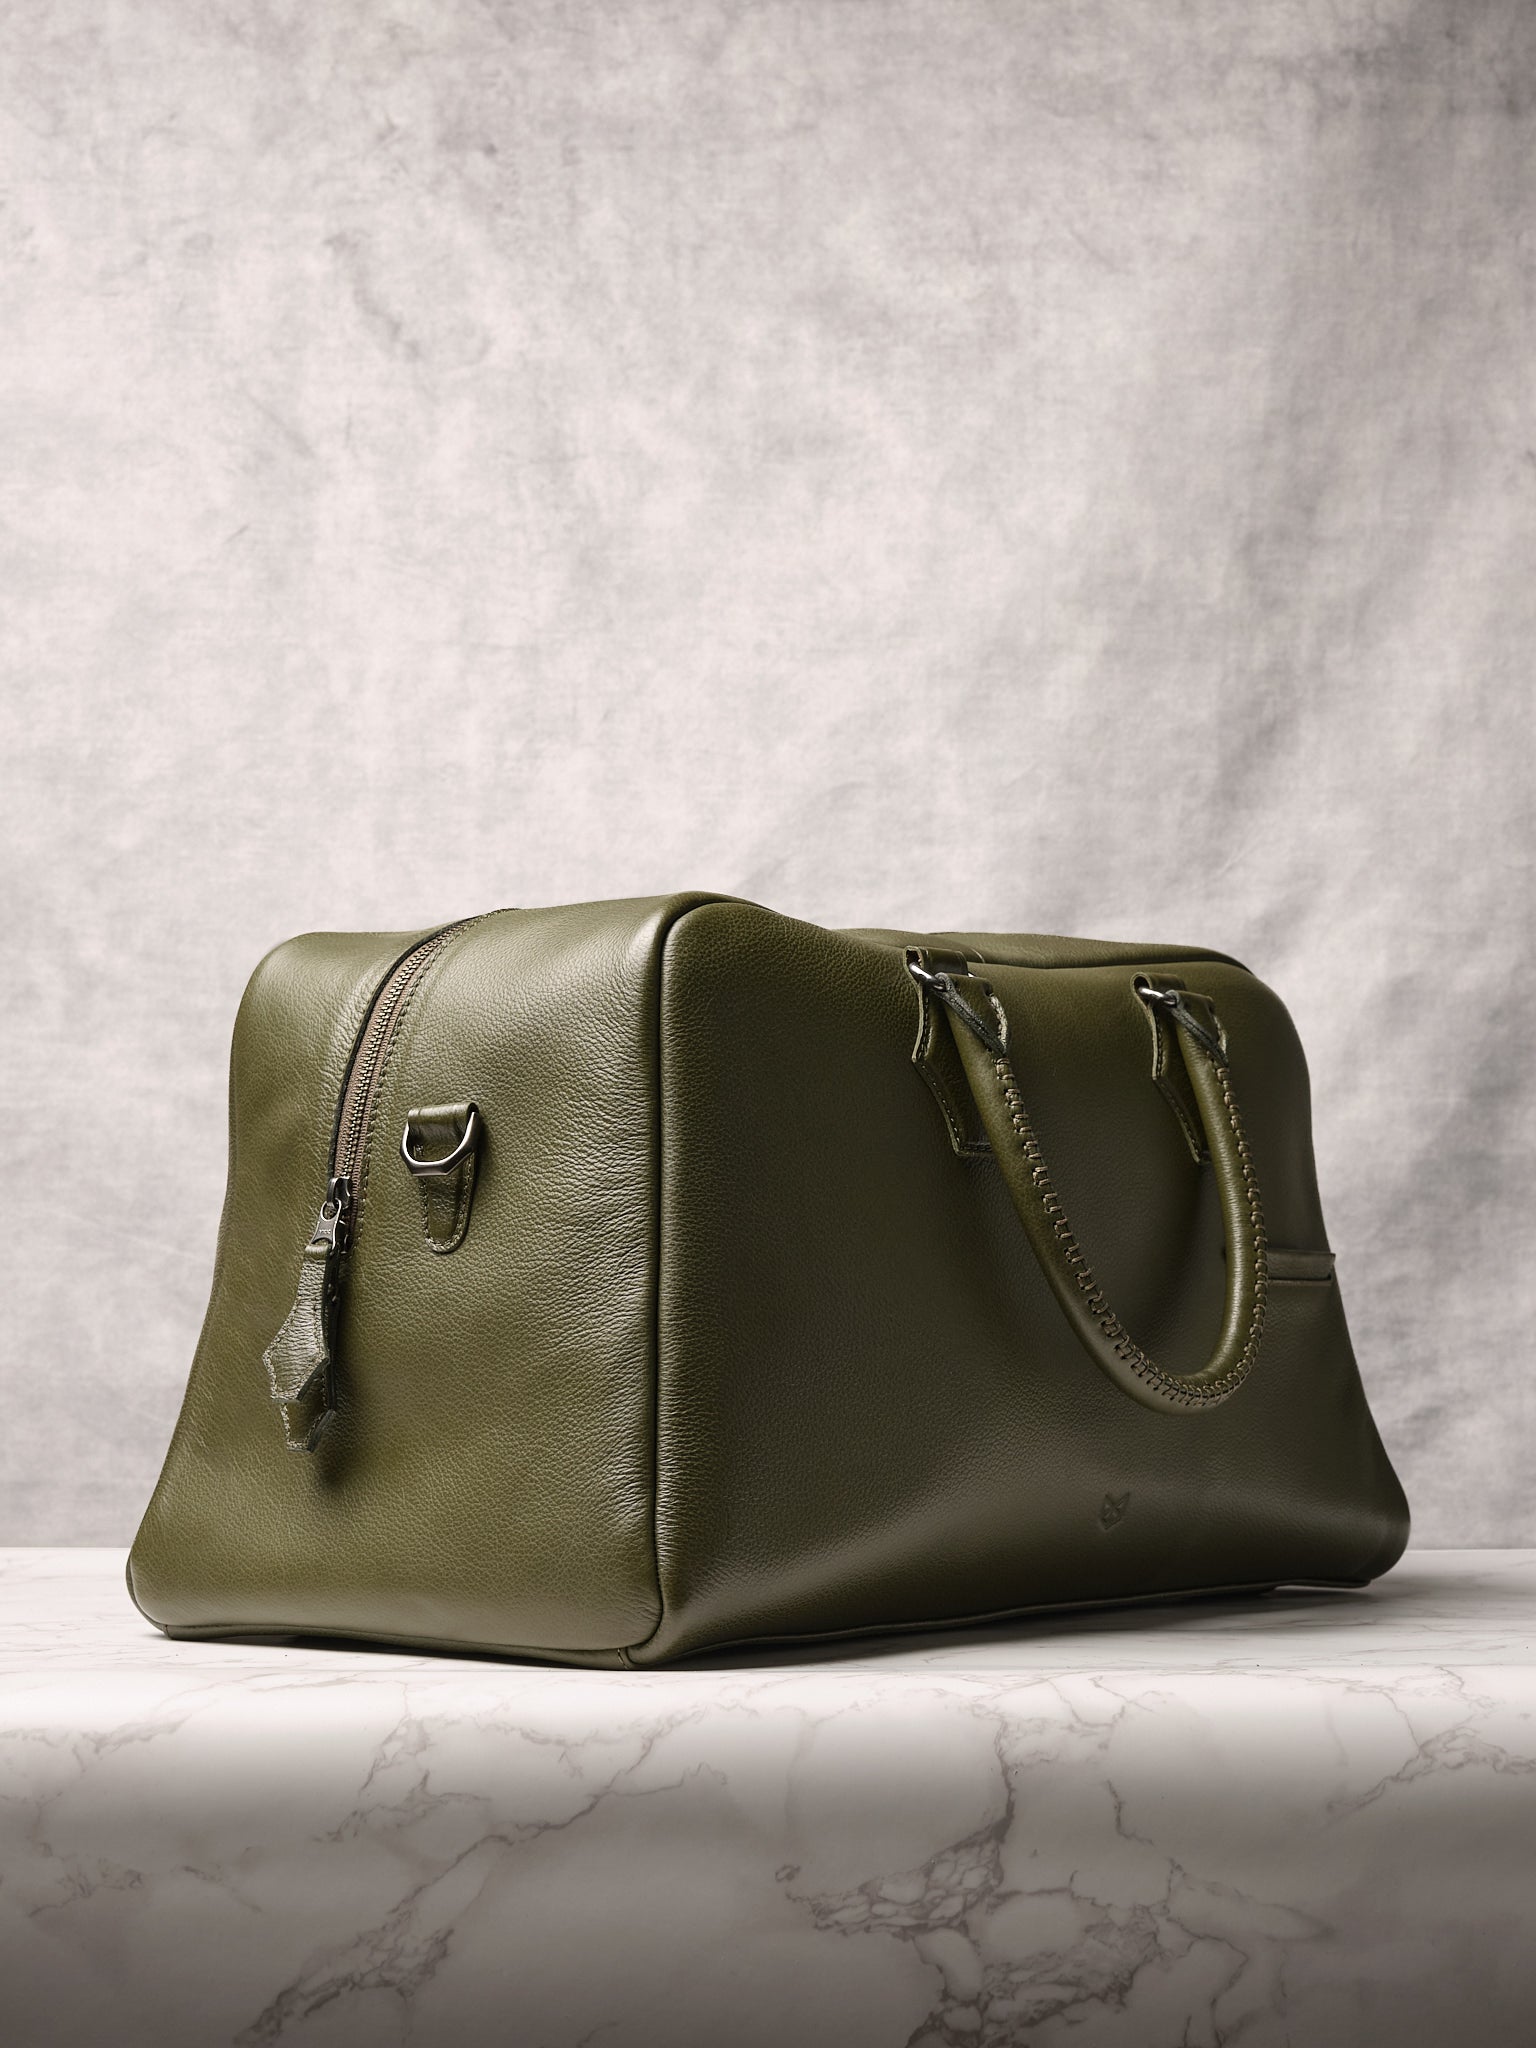 Duffle Bag Leather. Weekend Travel Bags Green by Capra Leather